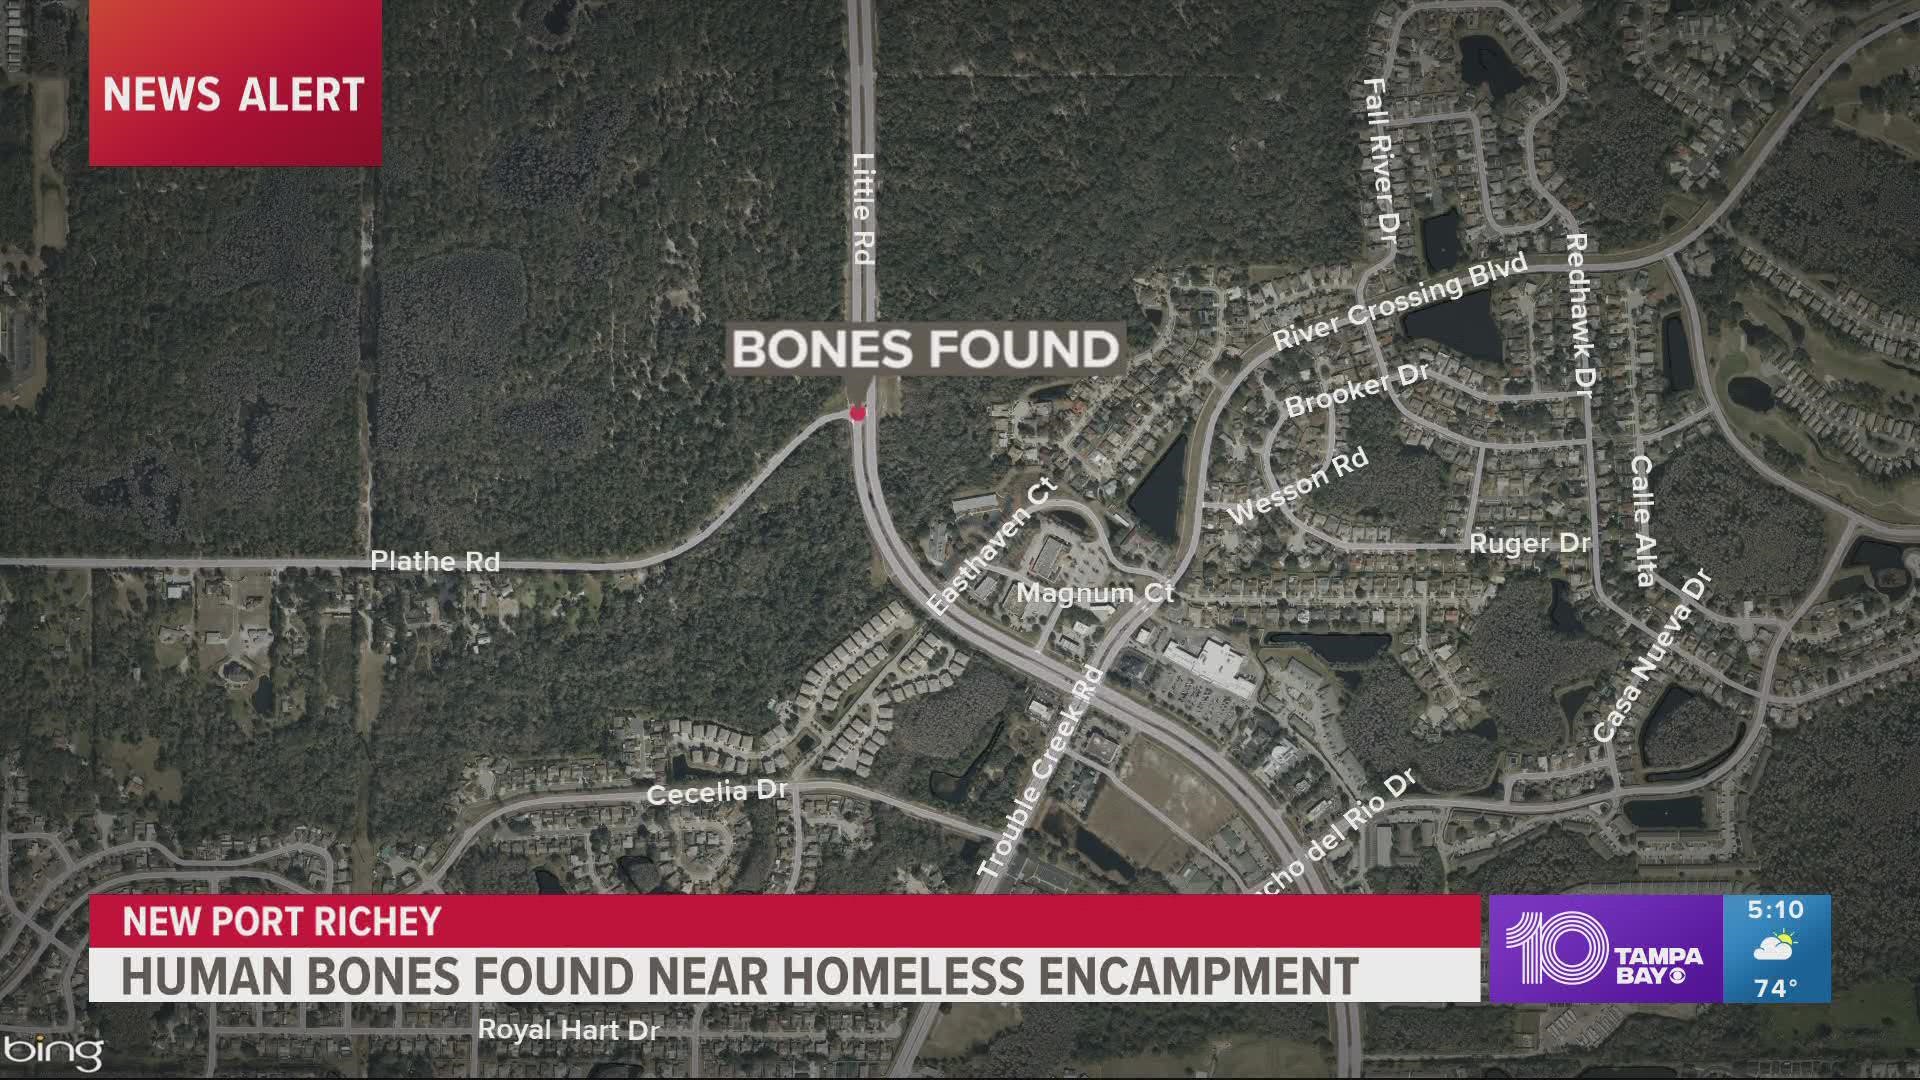 The sheriff's office said they were found near a homeless encampment.